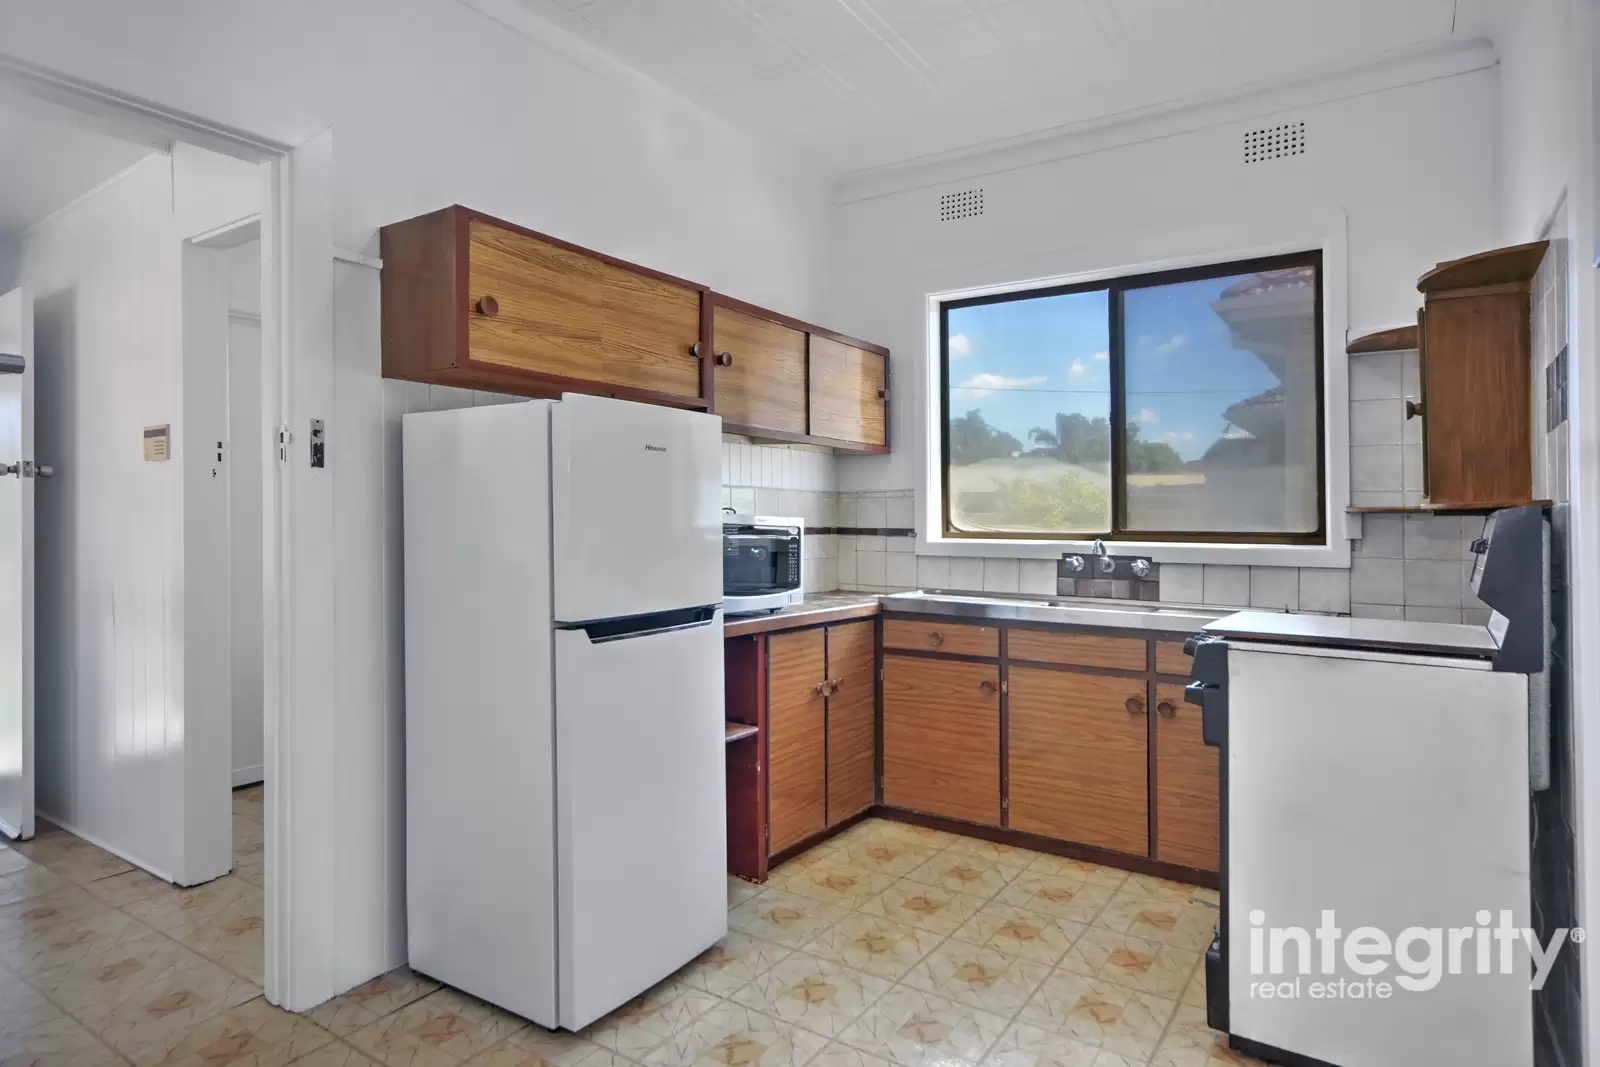 76 Illaroo Road, North Nowra Sold by Integrity Real Estate - image 4